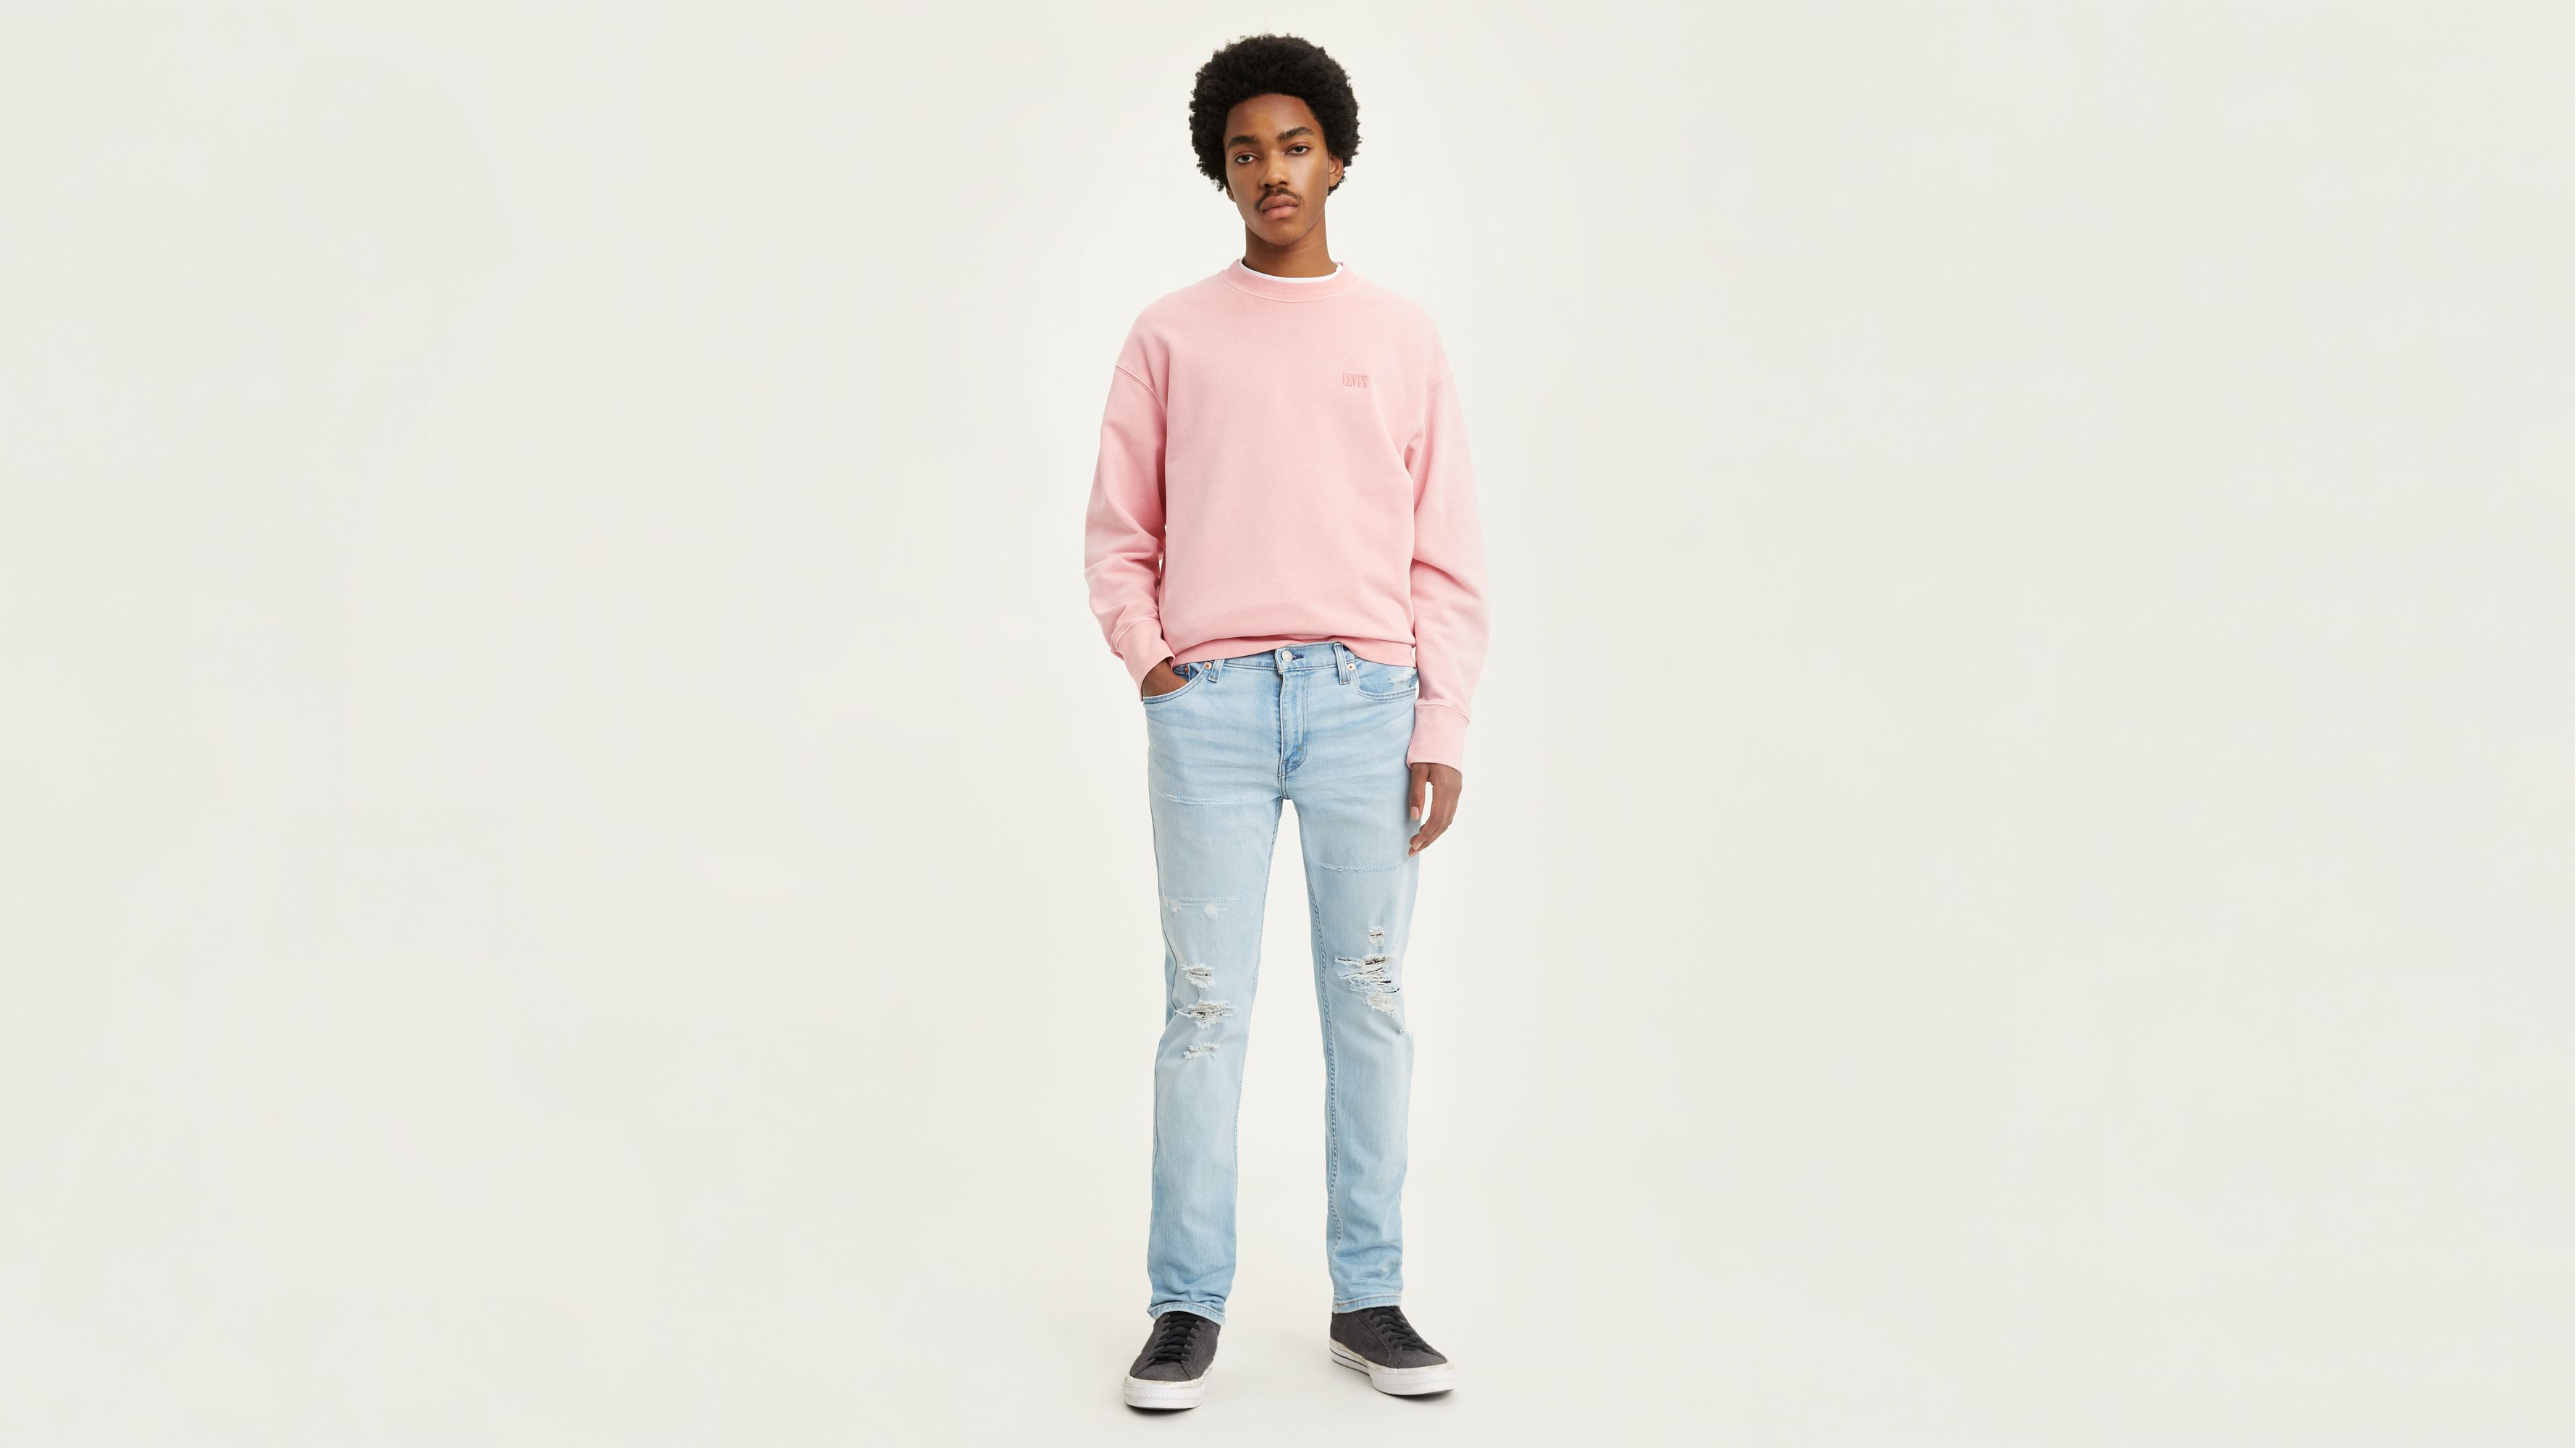 levi's ripped jeans mens